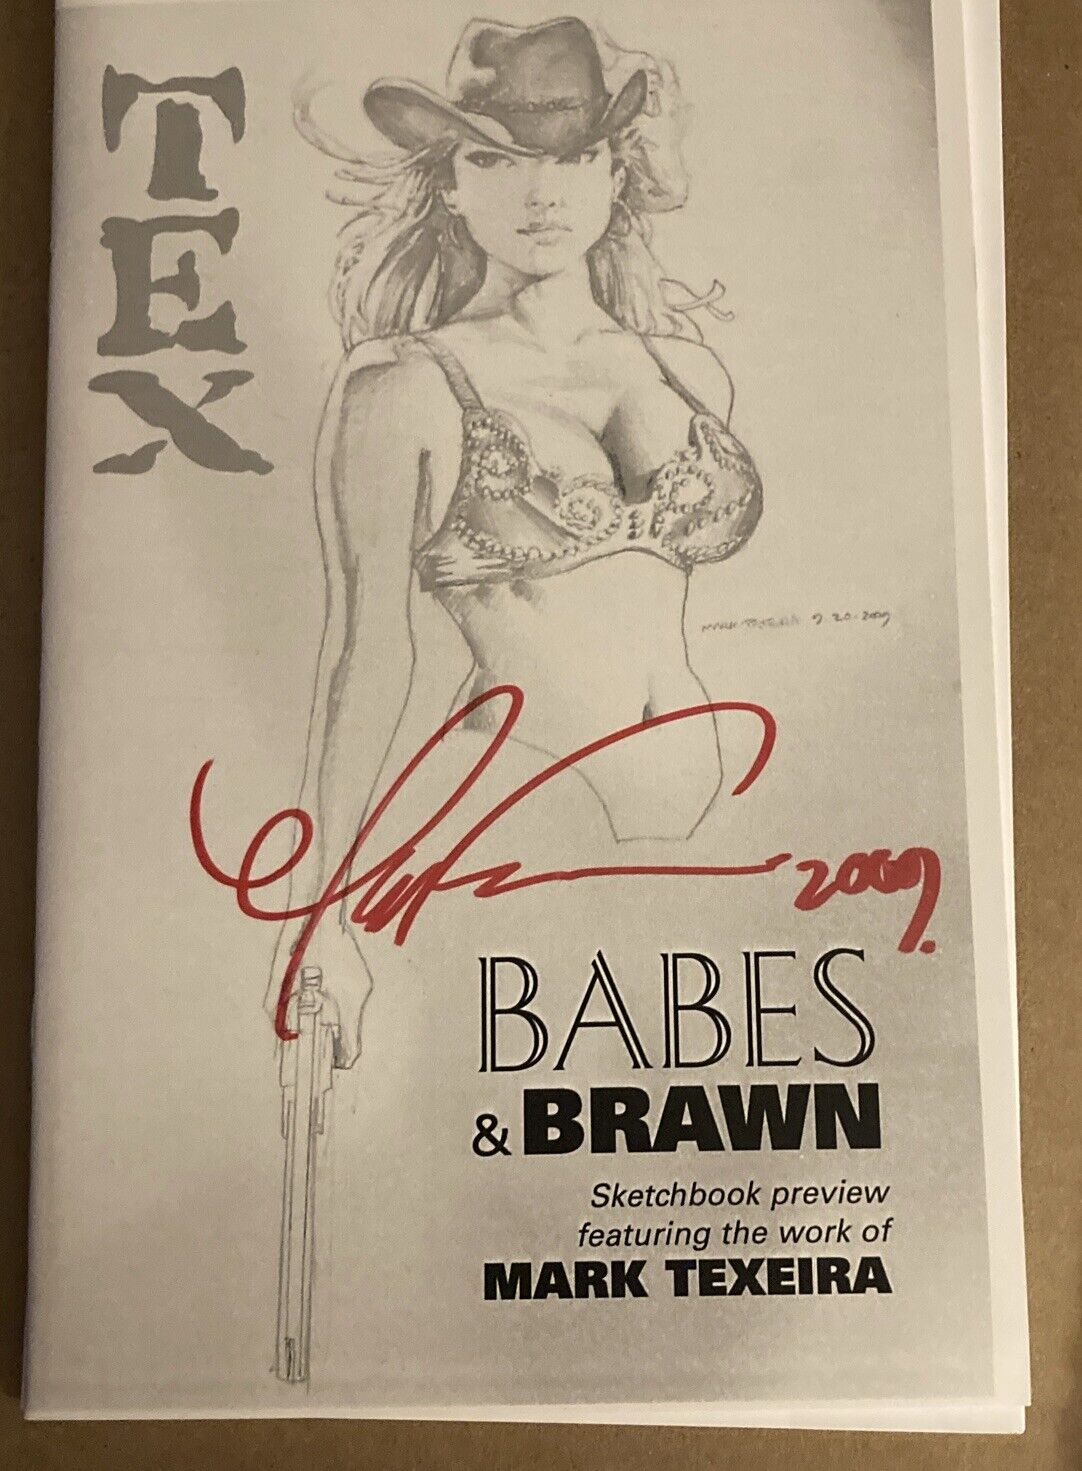 Signed Babes & Braun Sketchbook (NM) 2011 By Mark Texeira